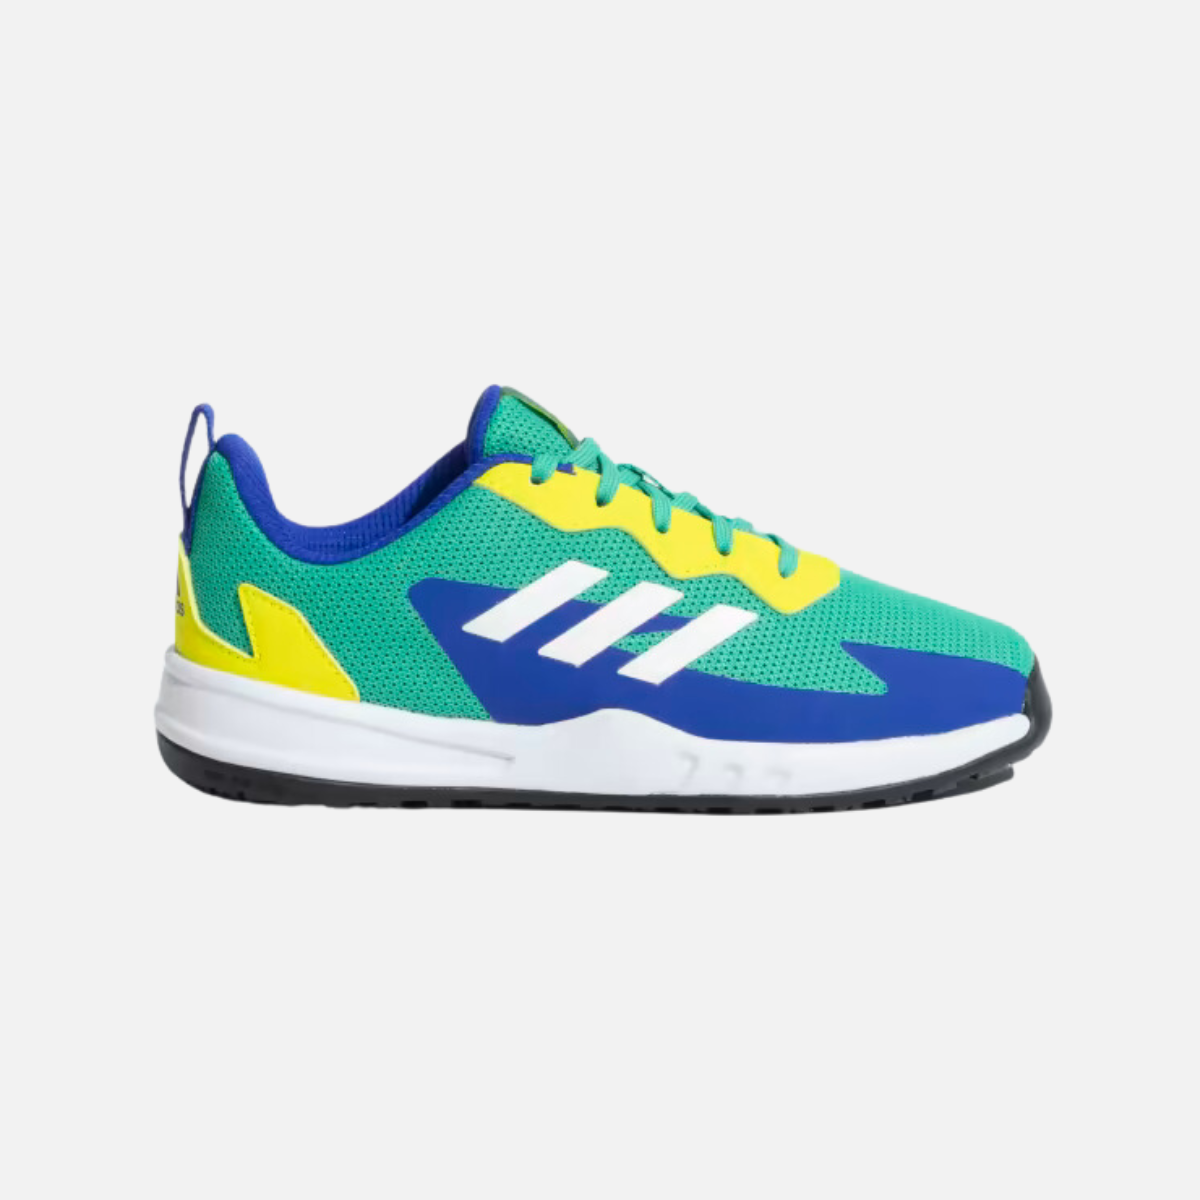 Adidas Sportswear AXELATE 2.0 K Kids Unisex Shoes BOY AND GIRL (4-16 YEAR) -Court Green/Lucid Blue/Cloud White/Acid Yellow